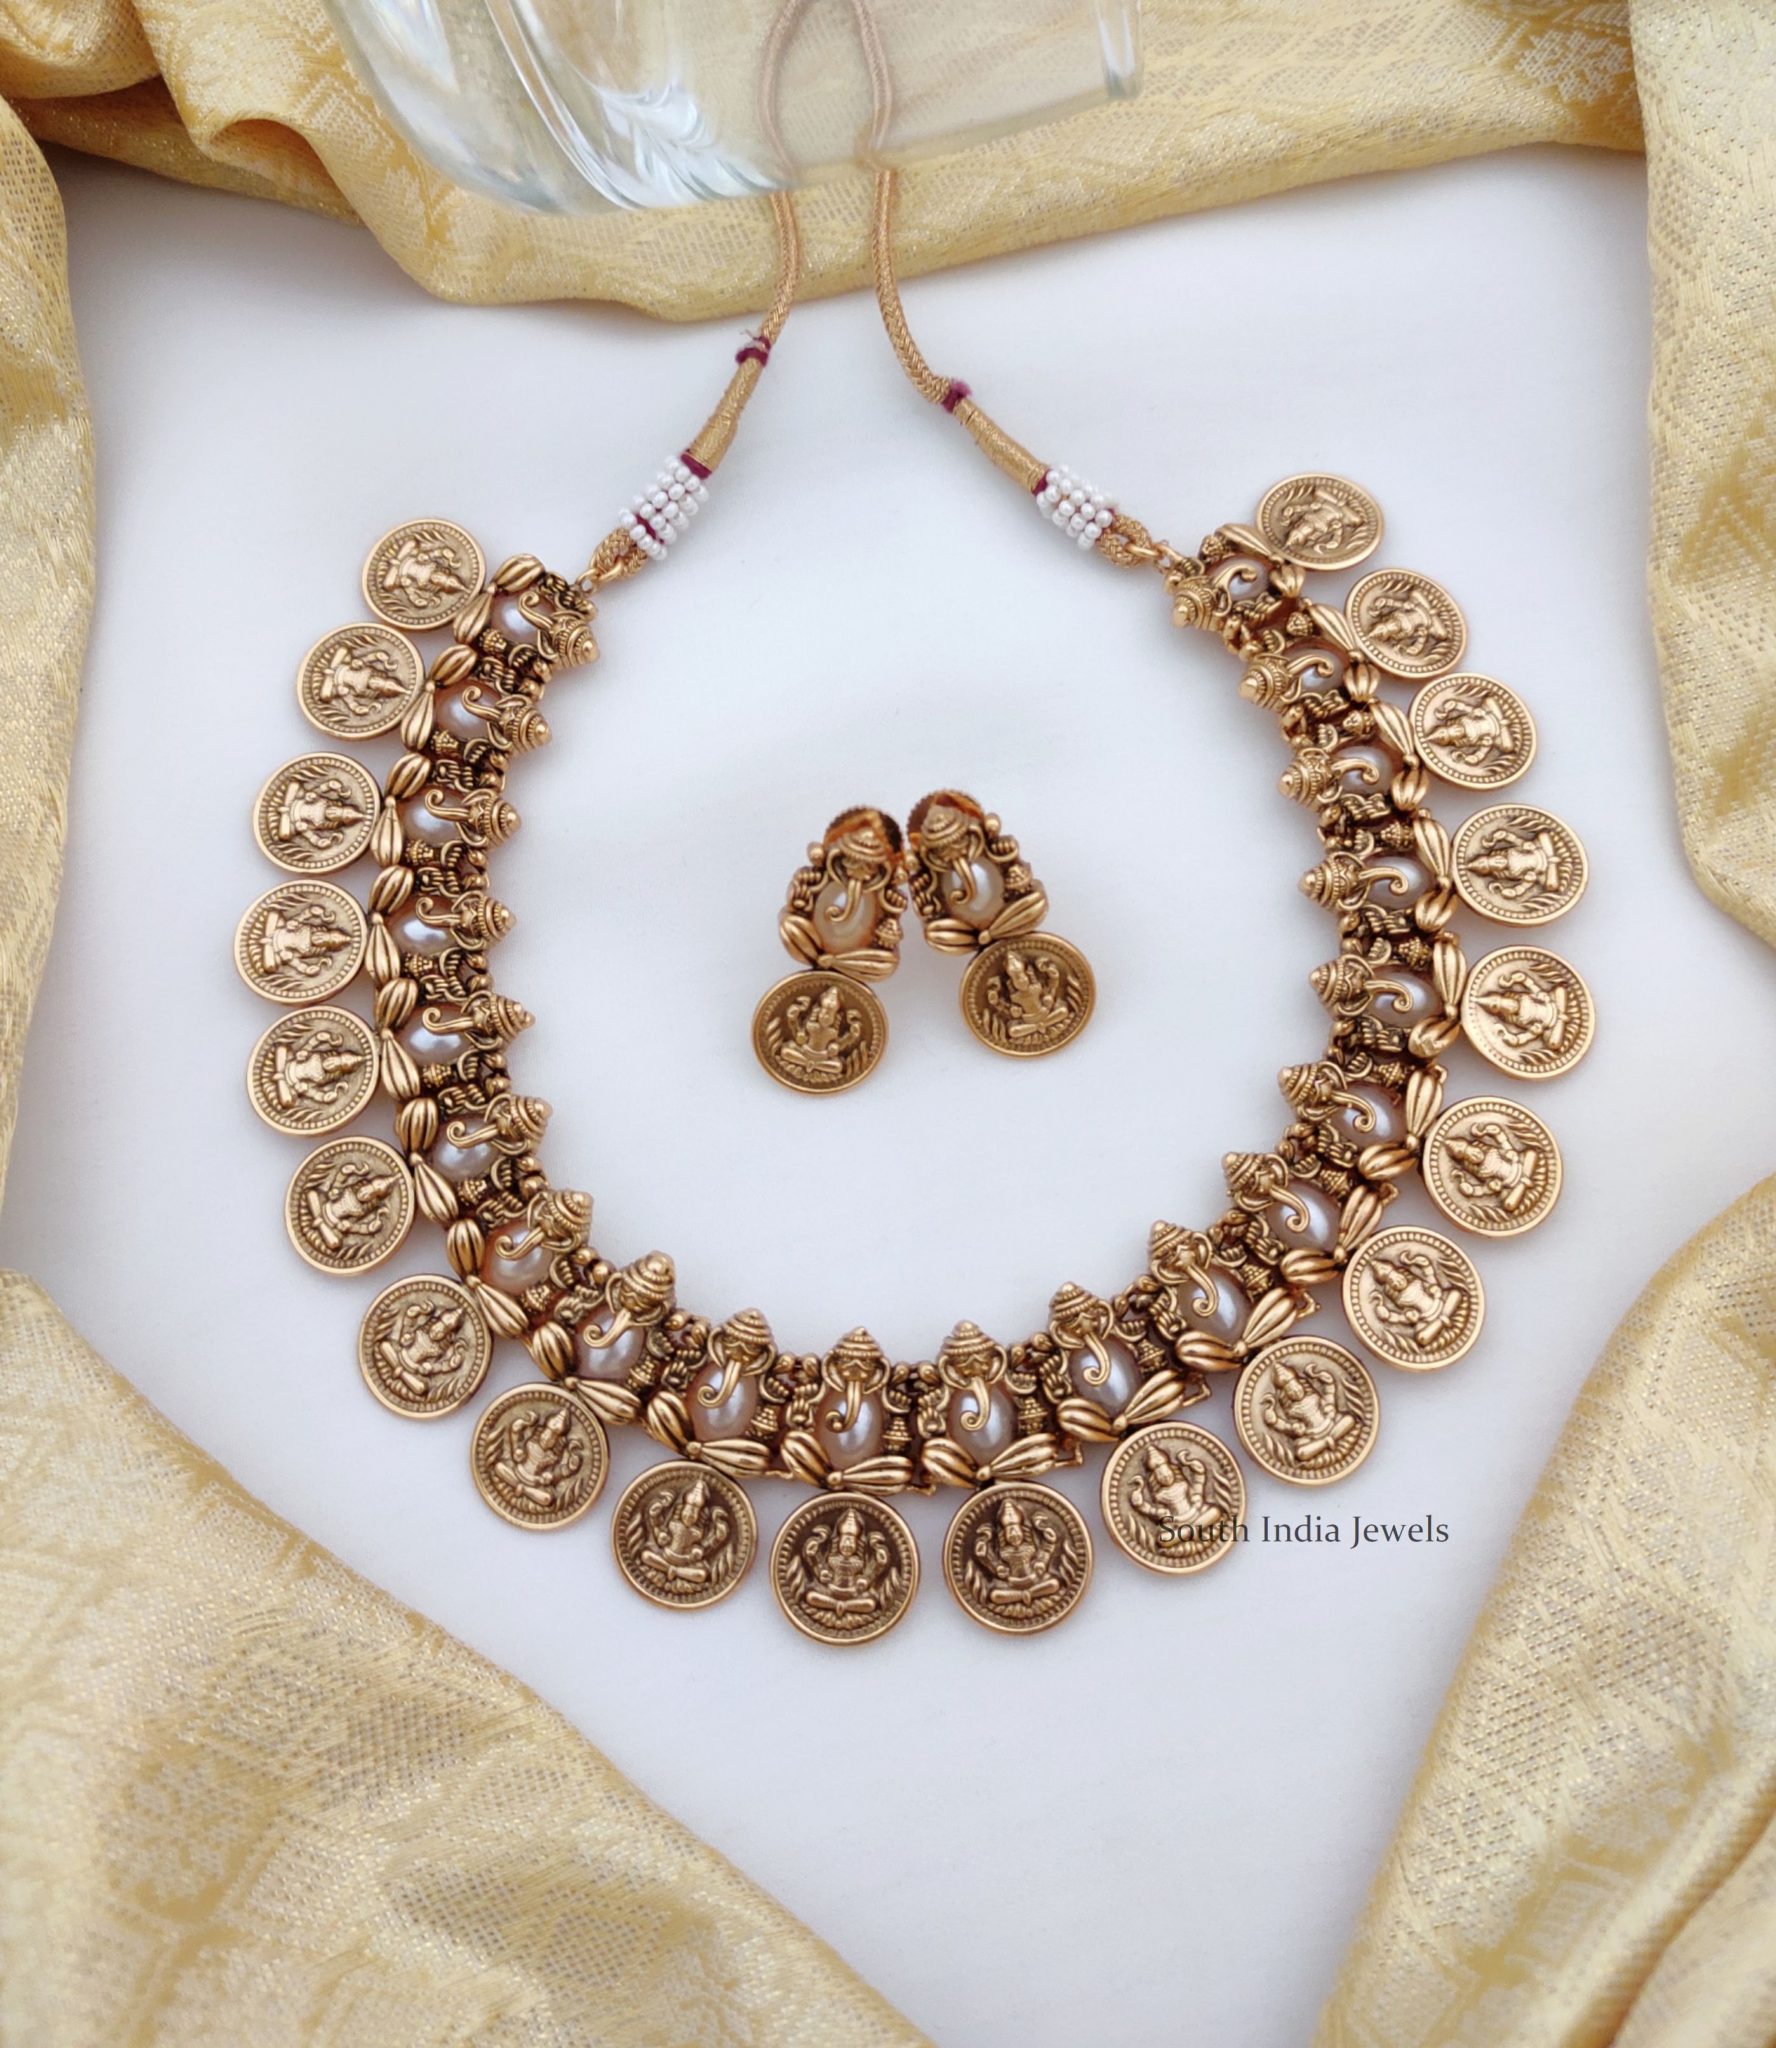 Traditional Ganesh Lakshmi Coin Necklace - South India Jewels